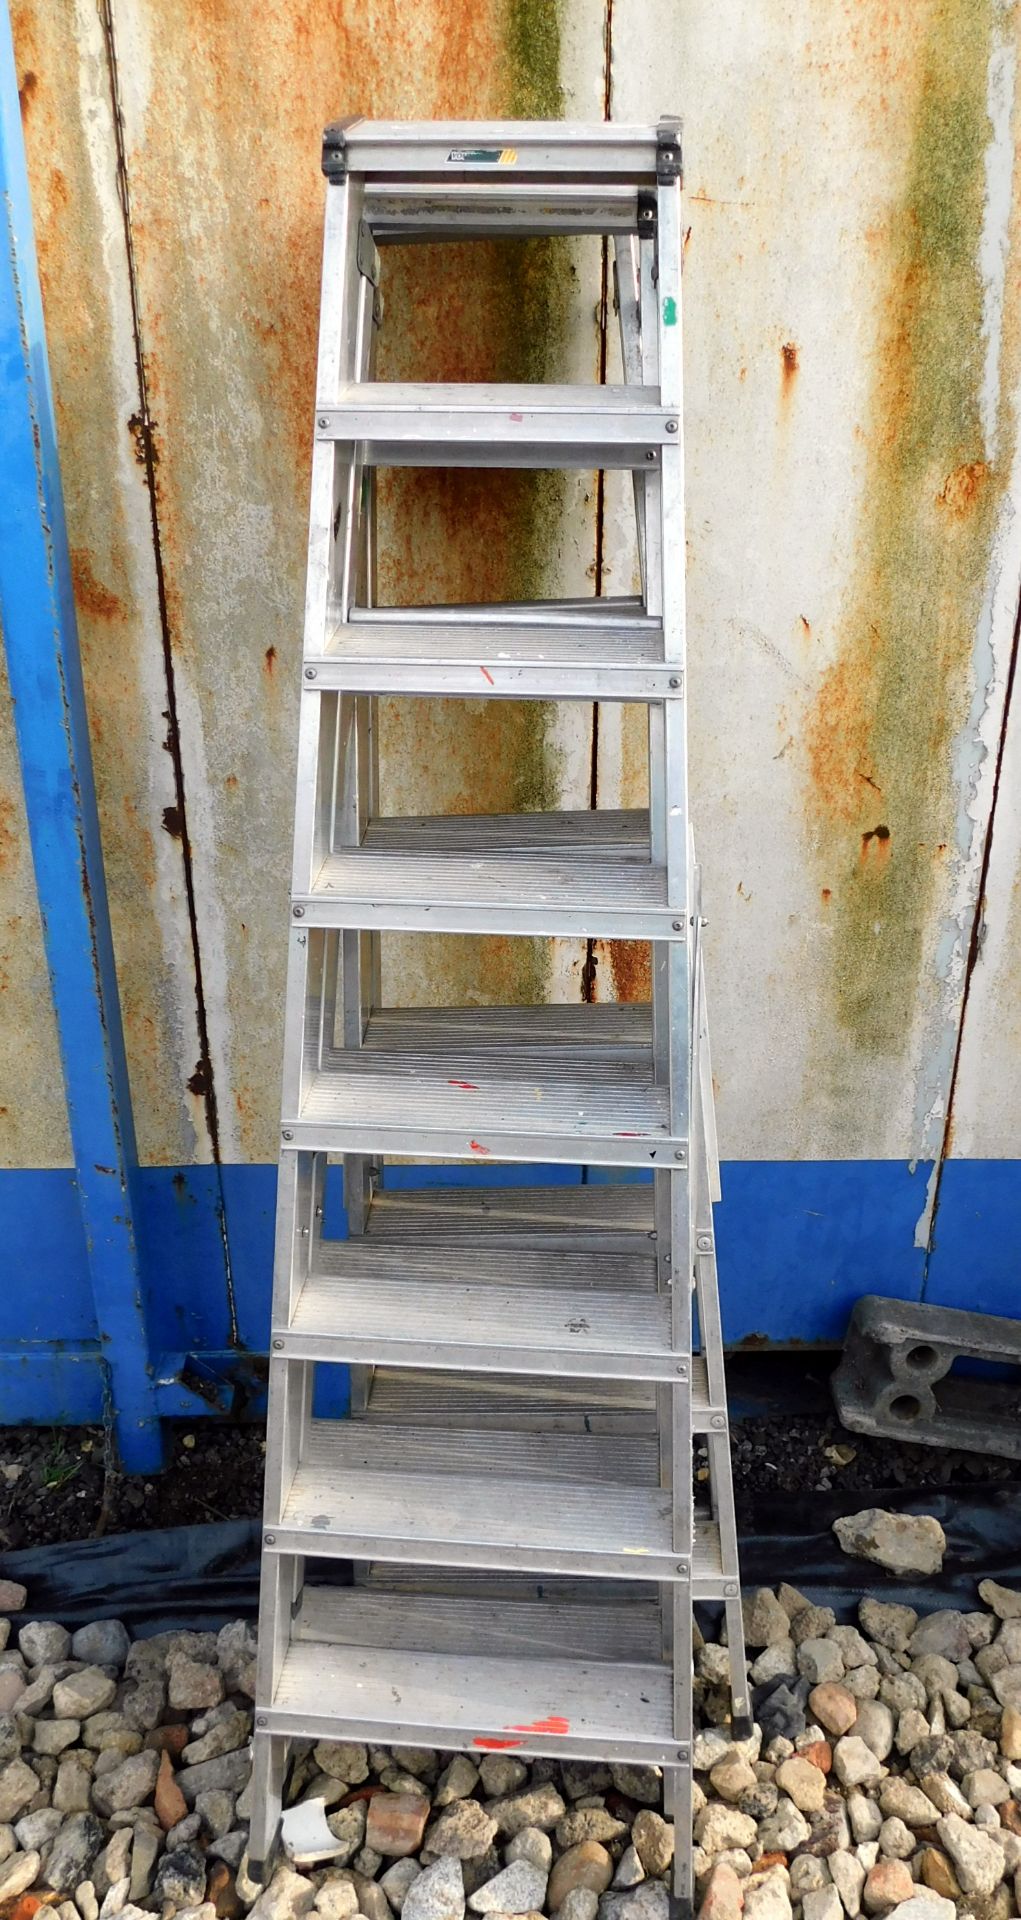 3 7-Tread Aluminium Step Ladders (Located Upminster – See General Notes for Full Address)